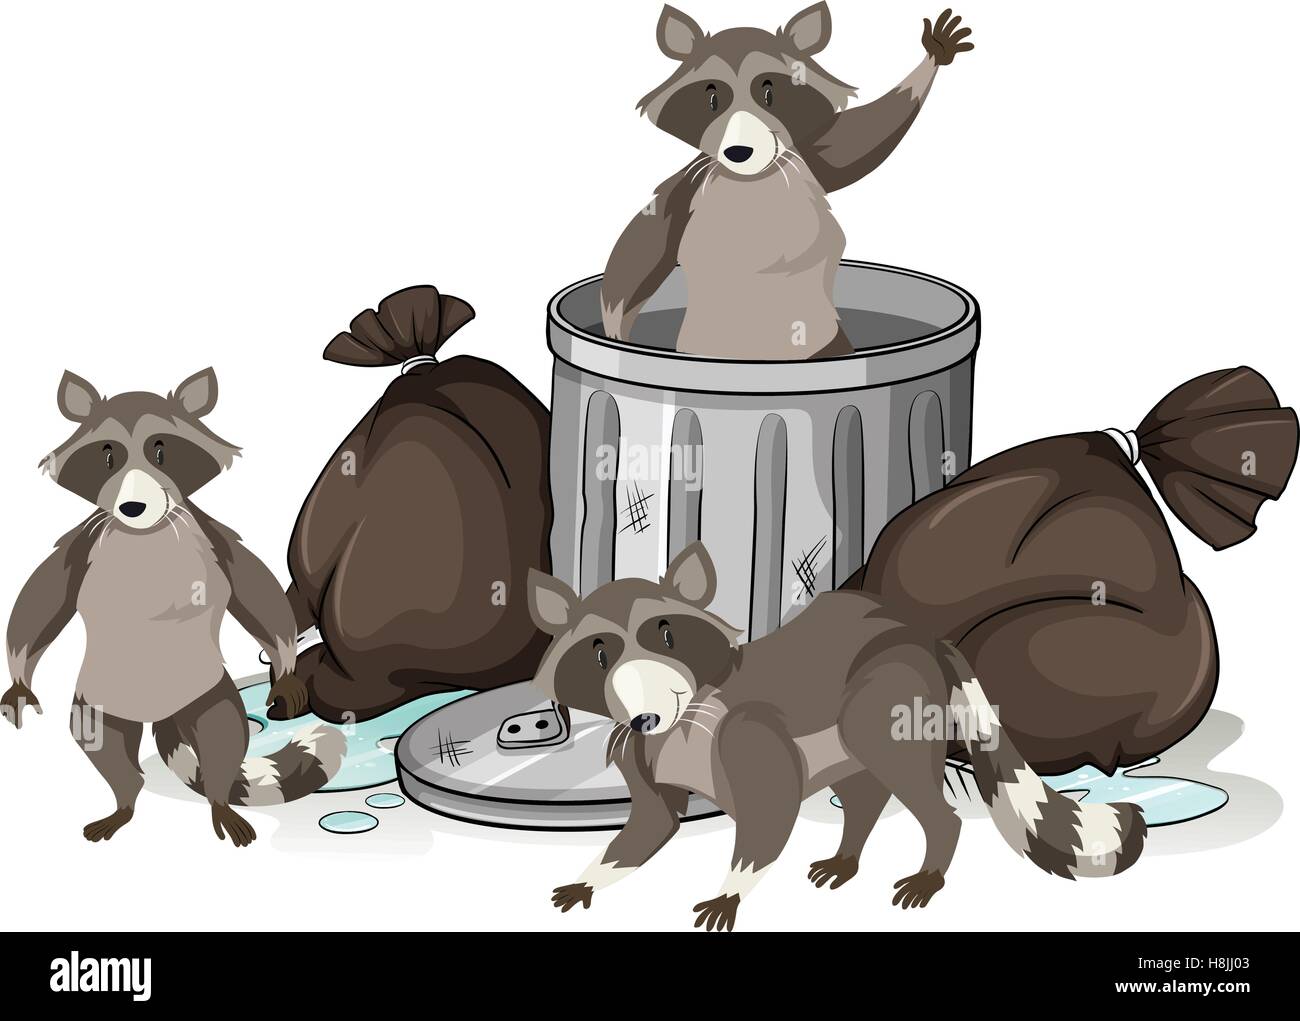 Raccoon searching trash for food illustration Stock Vector